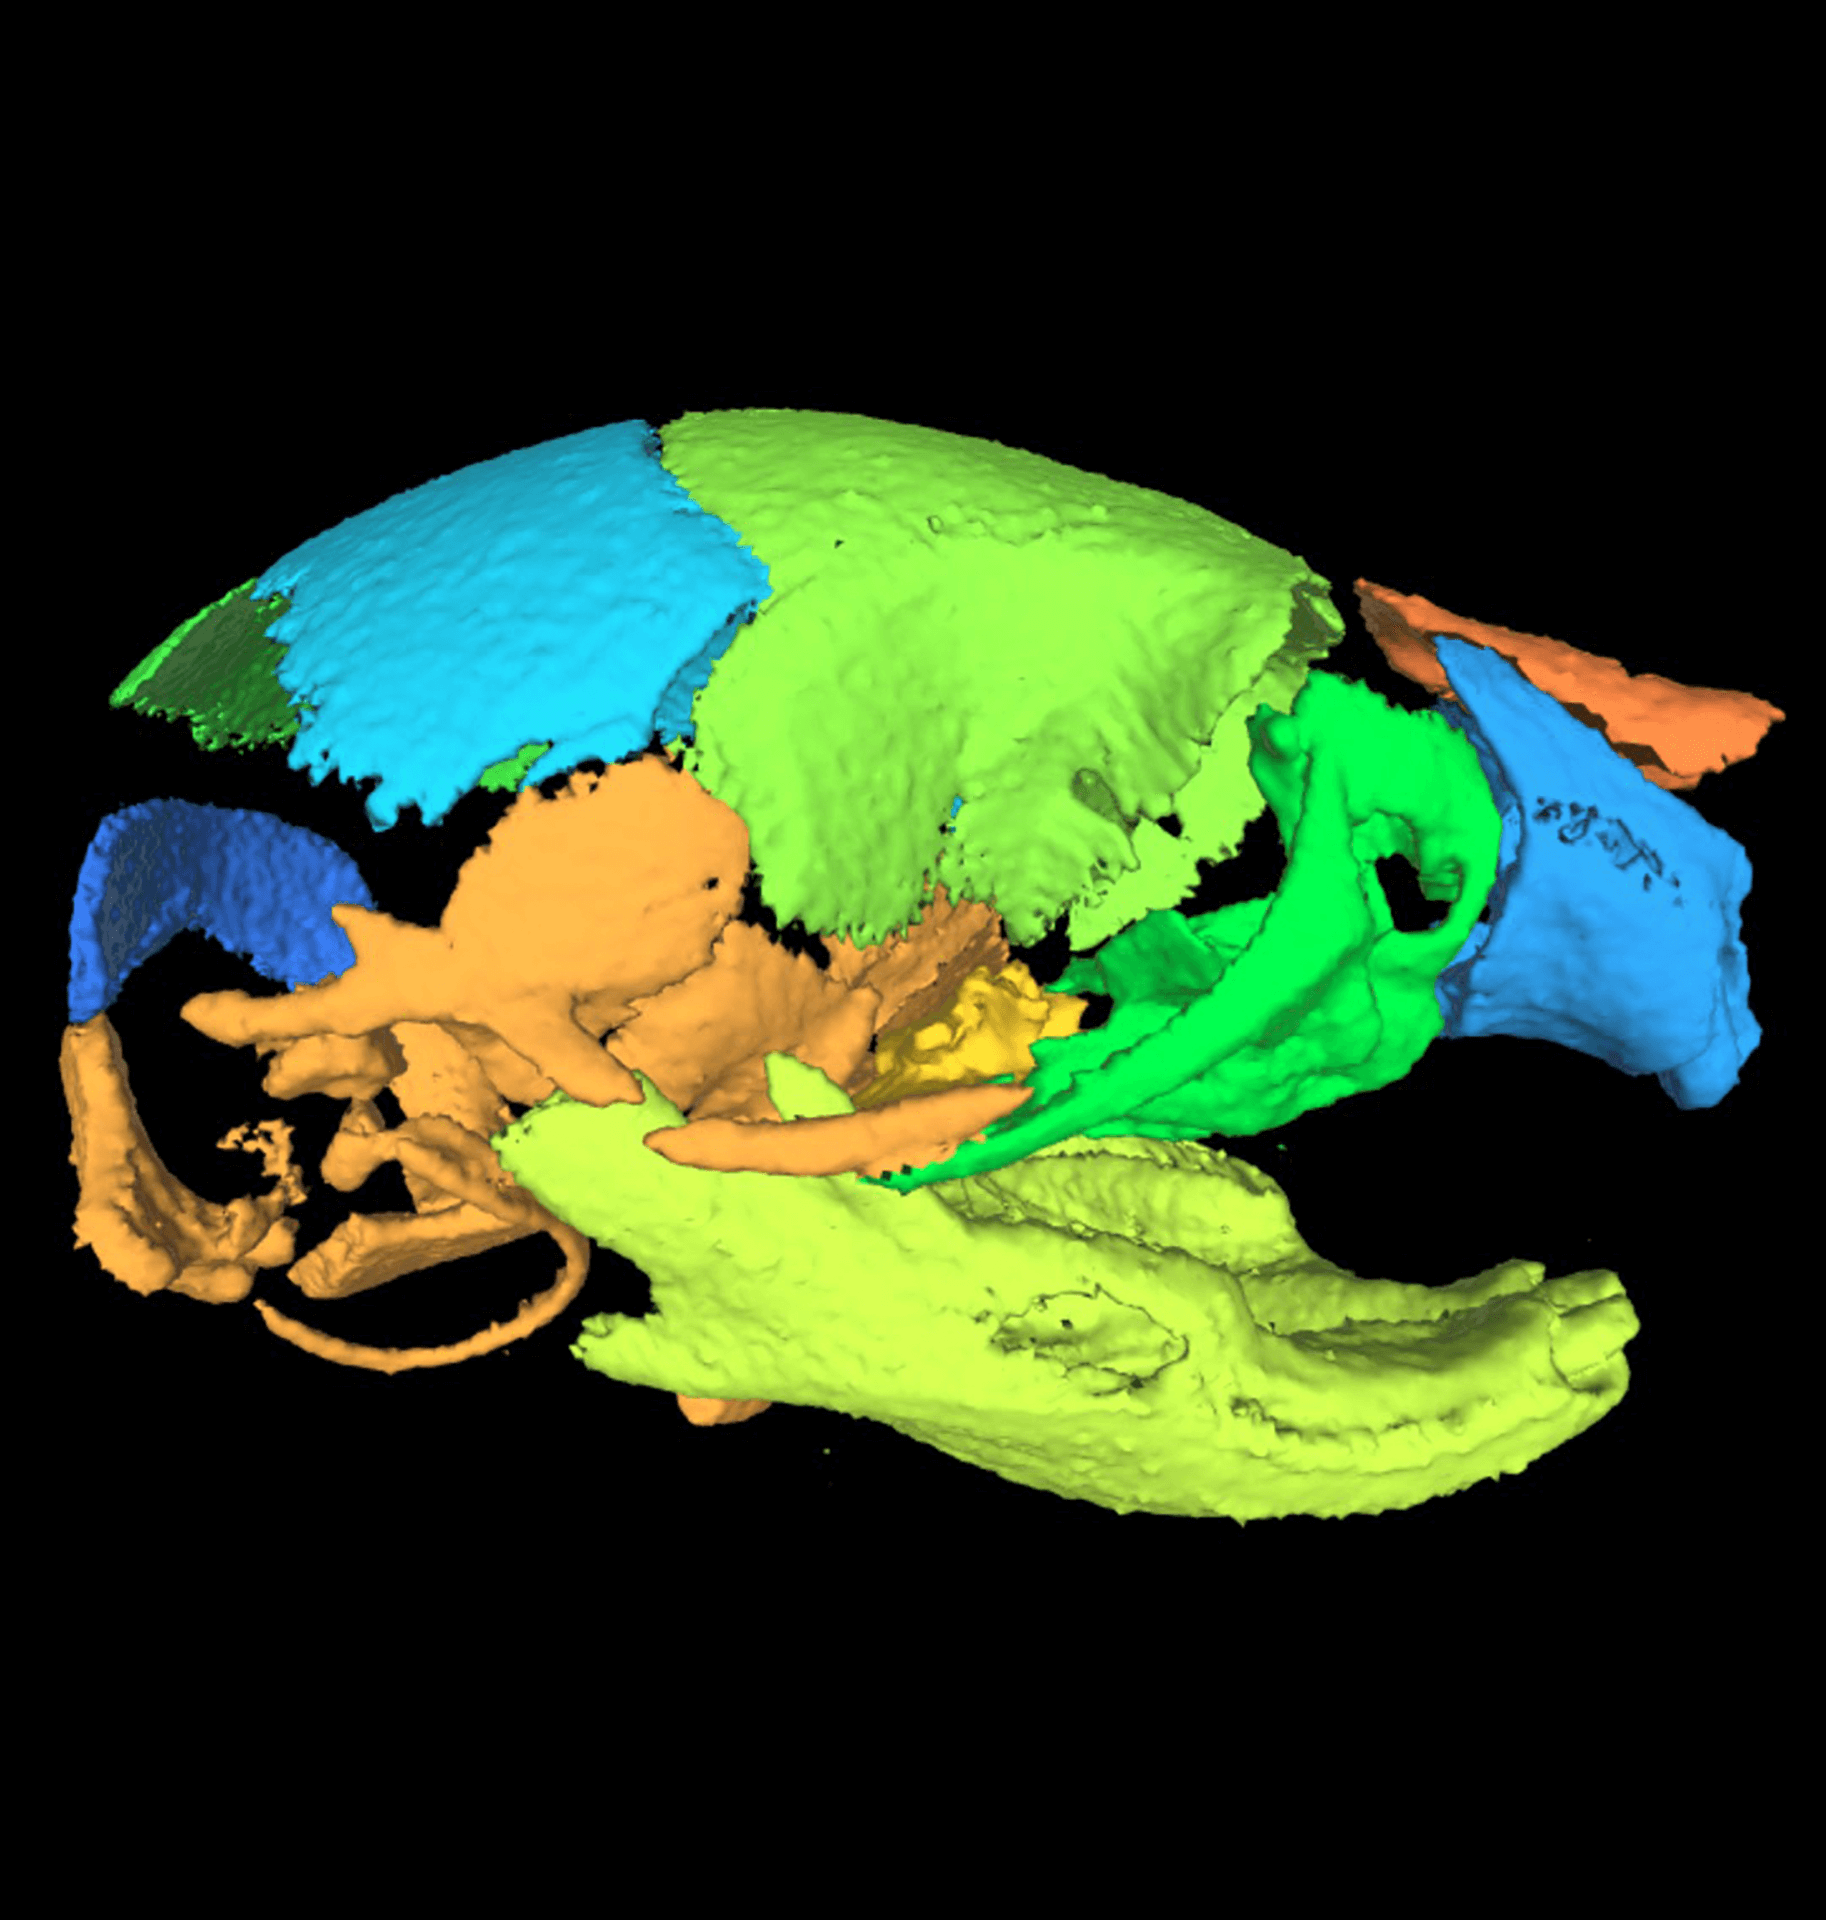 Image of a lateral skull